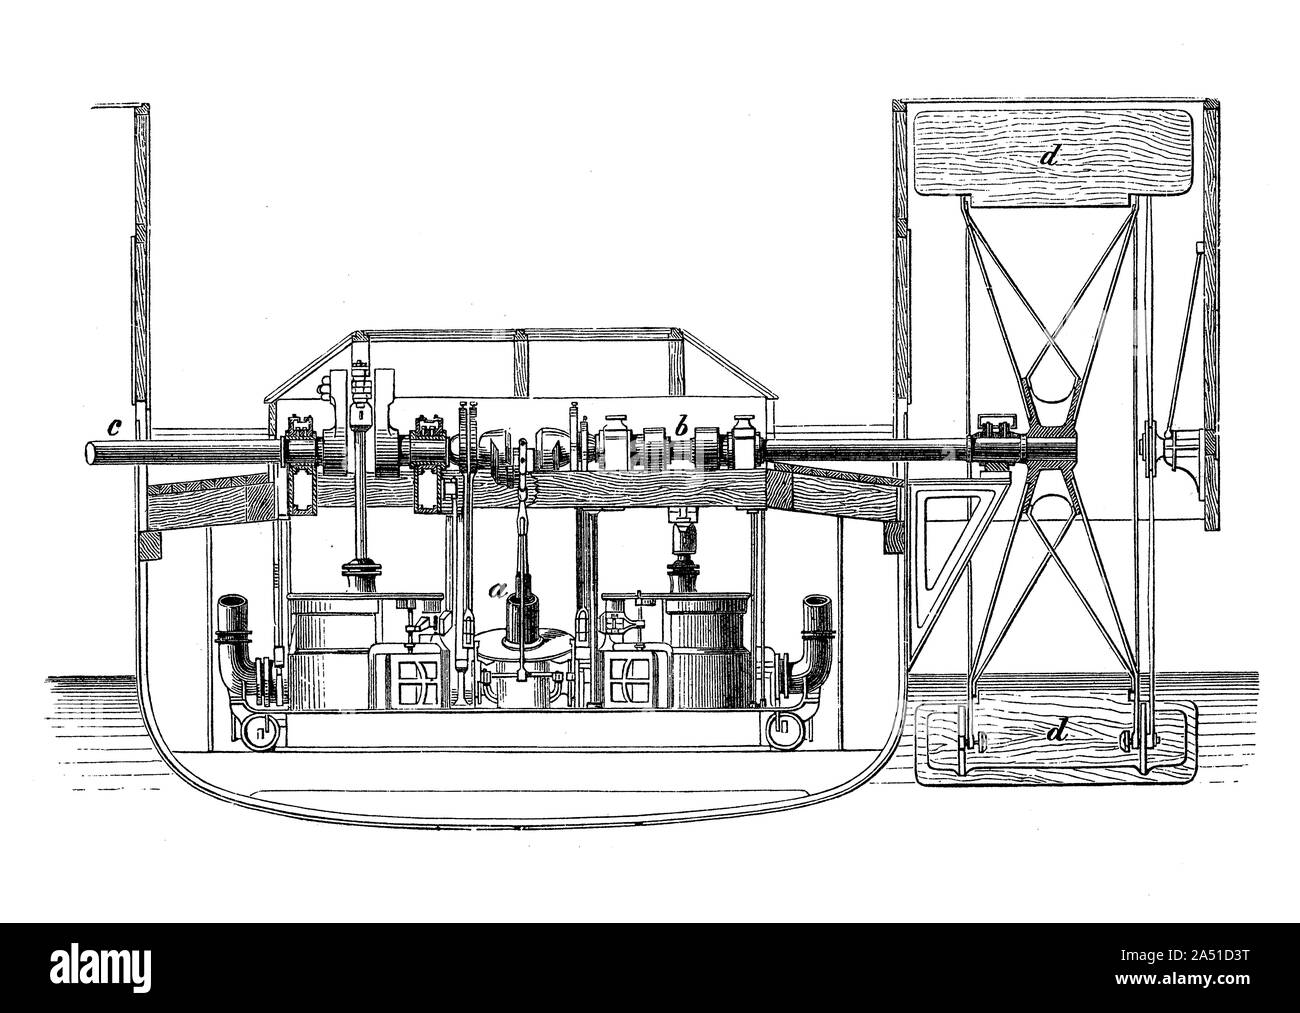 Two cylinders oscillatory engine for paddle-steamer drives the paddle wheels to propel the craft through the water Stock Photo